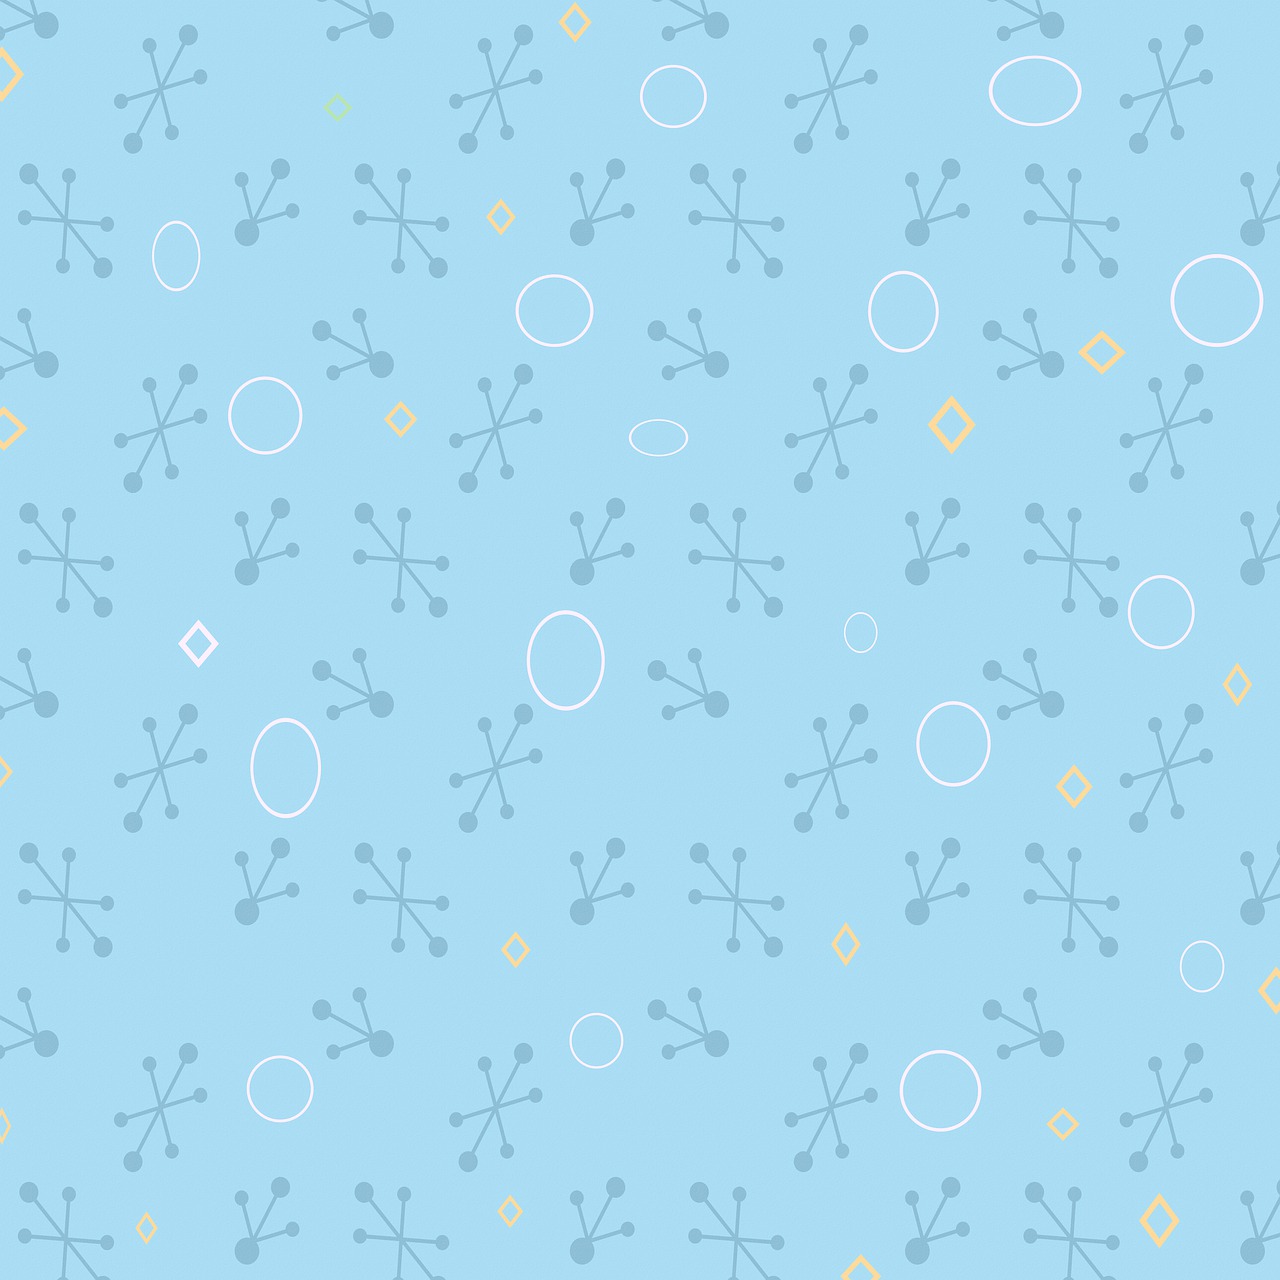 a pattern of circles and dots on a blue background, an illustration of, by Maeda Masao, cutie mark, diatoms, strings background, in style of monkeybone